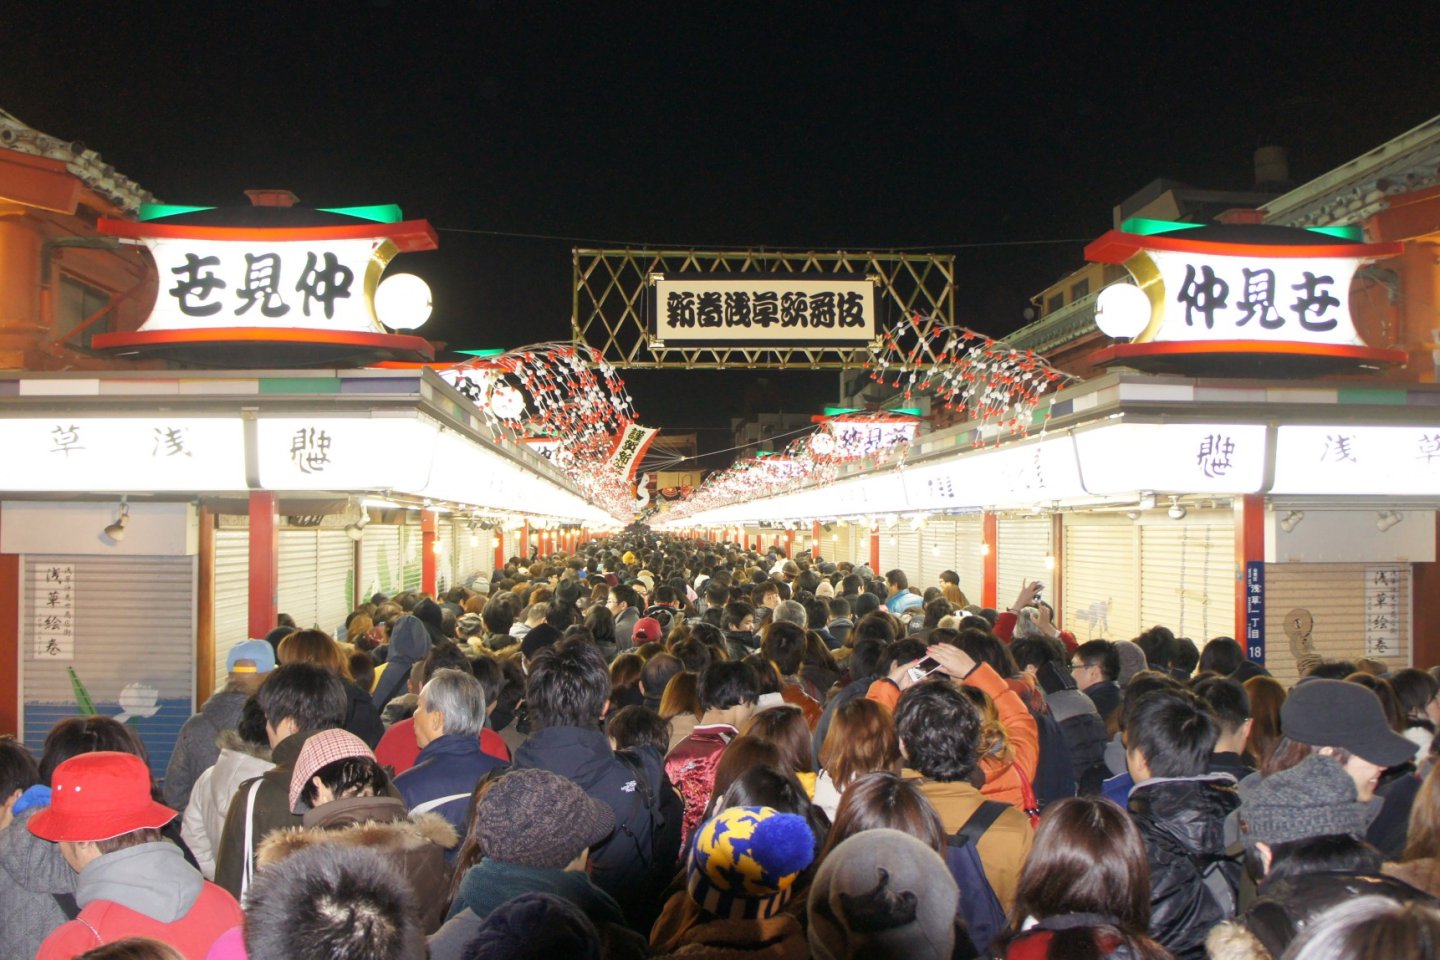 The first visit to a shrine in the New Year is called Hatsumode and it attracts crowds at major locations all around Japan, Asakusa being one of the most prominent locations in Tokyo.